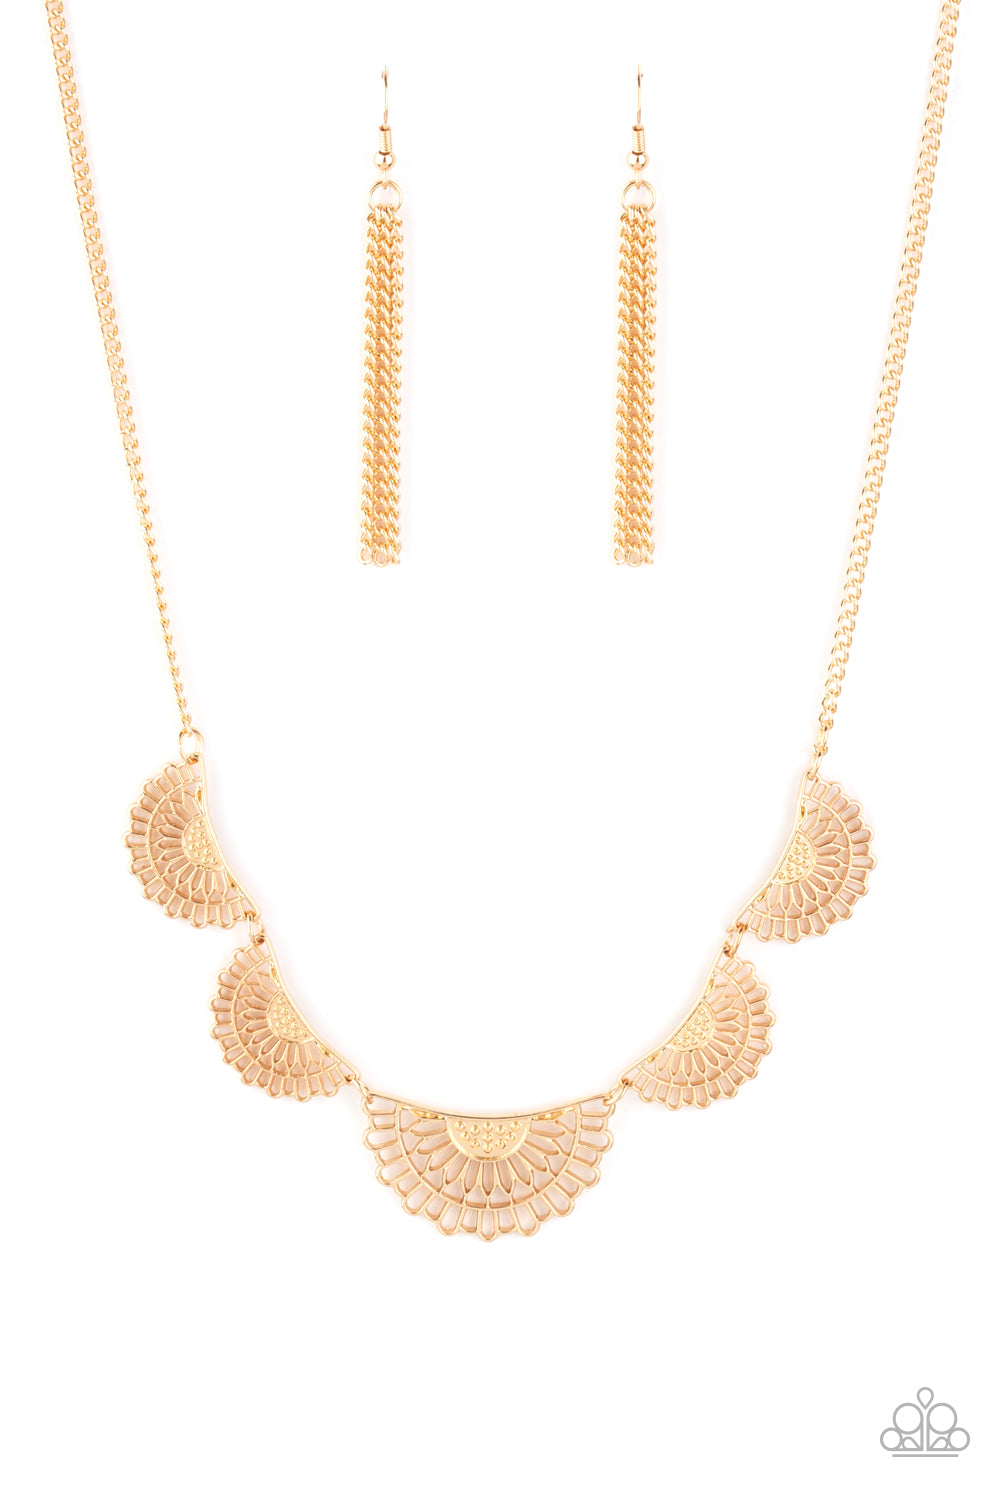 Paparazzi Necklaces - Fanned Out Fashion - gold